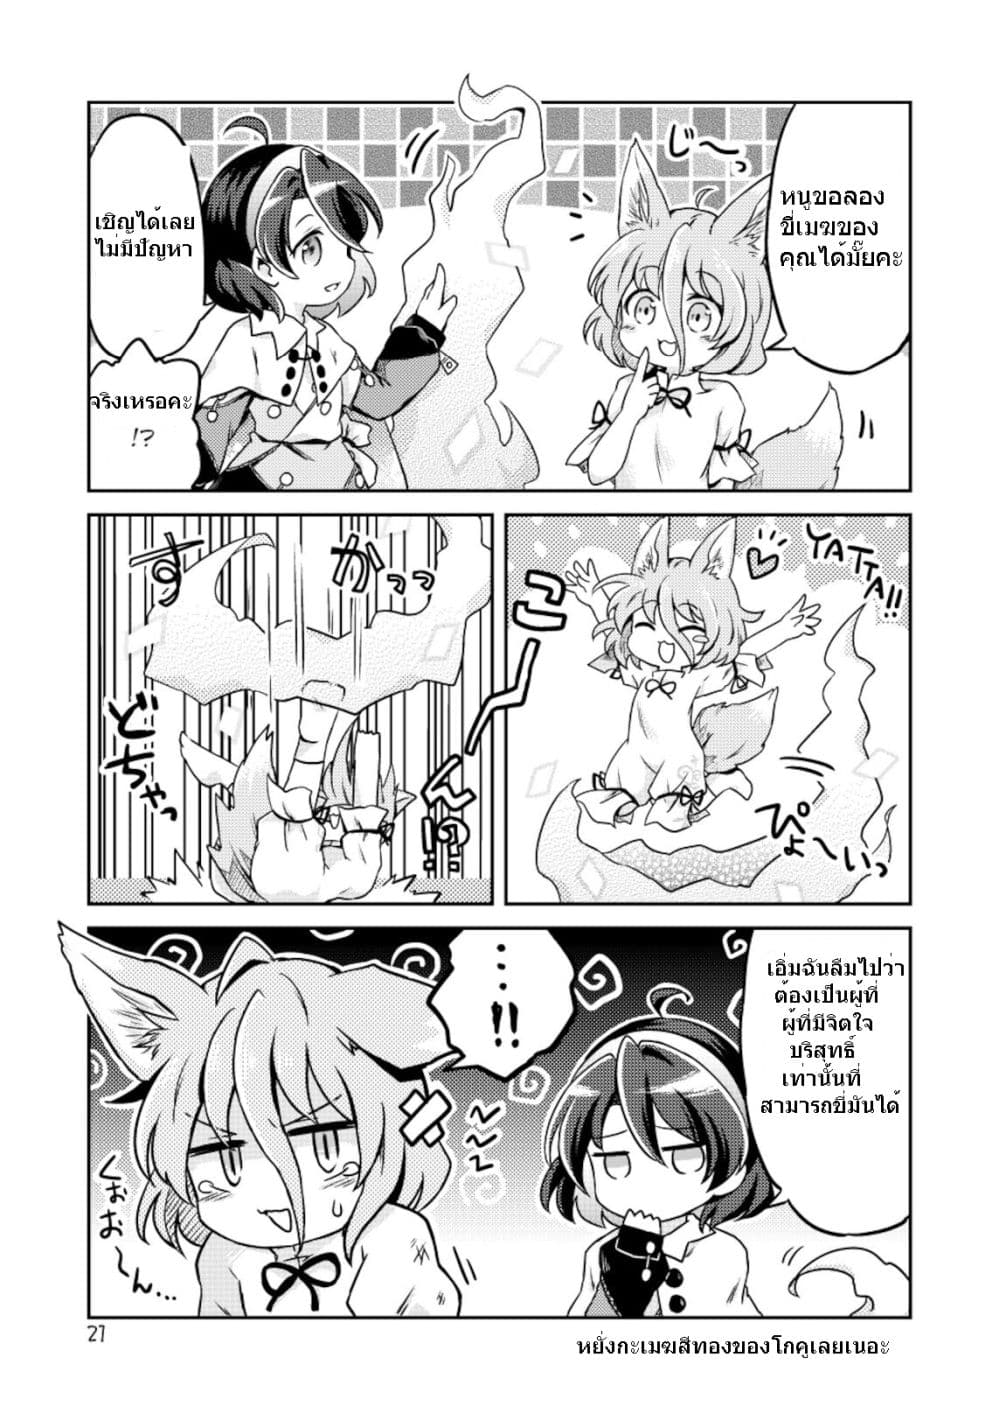 Touhou Project Chima Book By Pote ตอนที่ 2 (21)